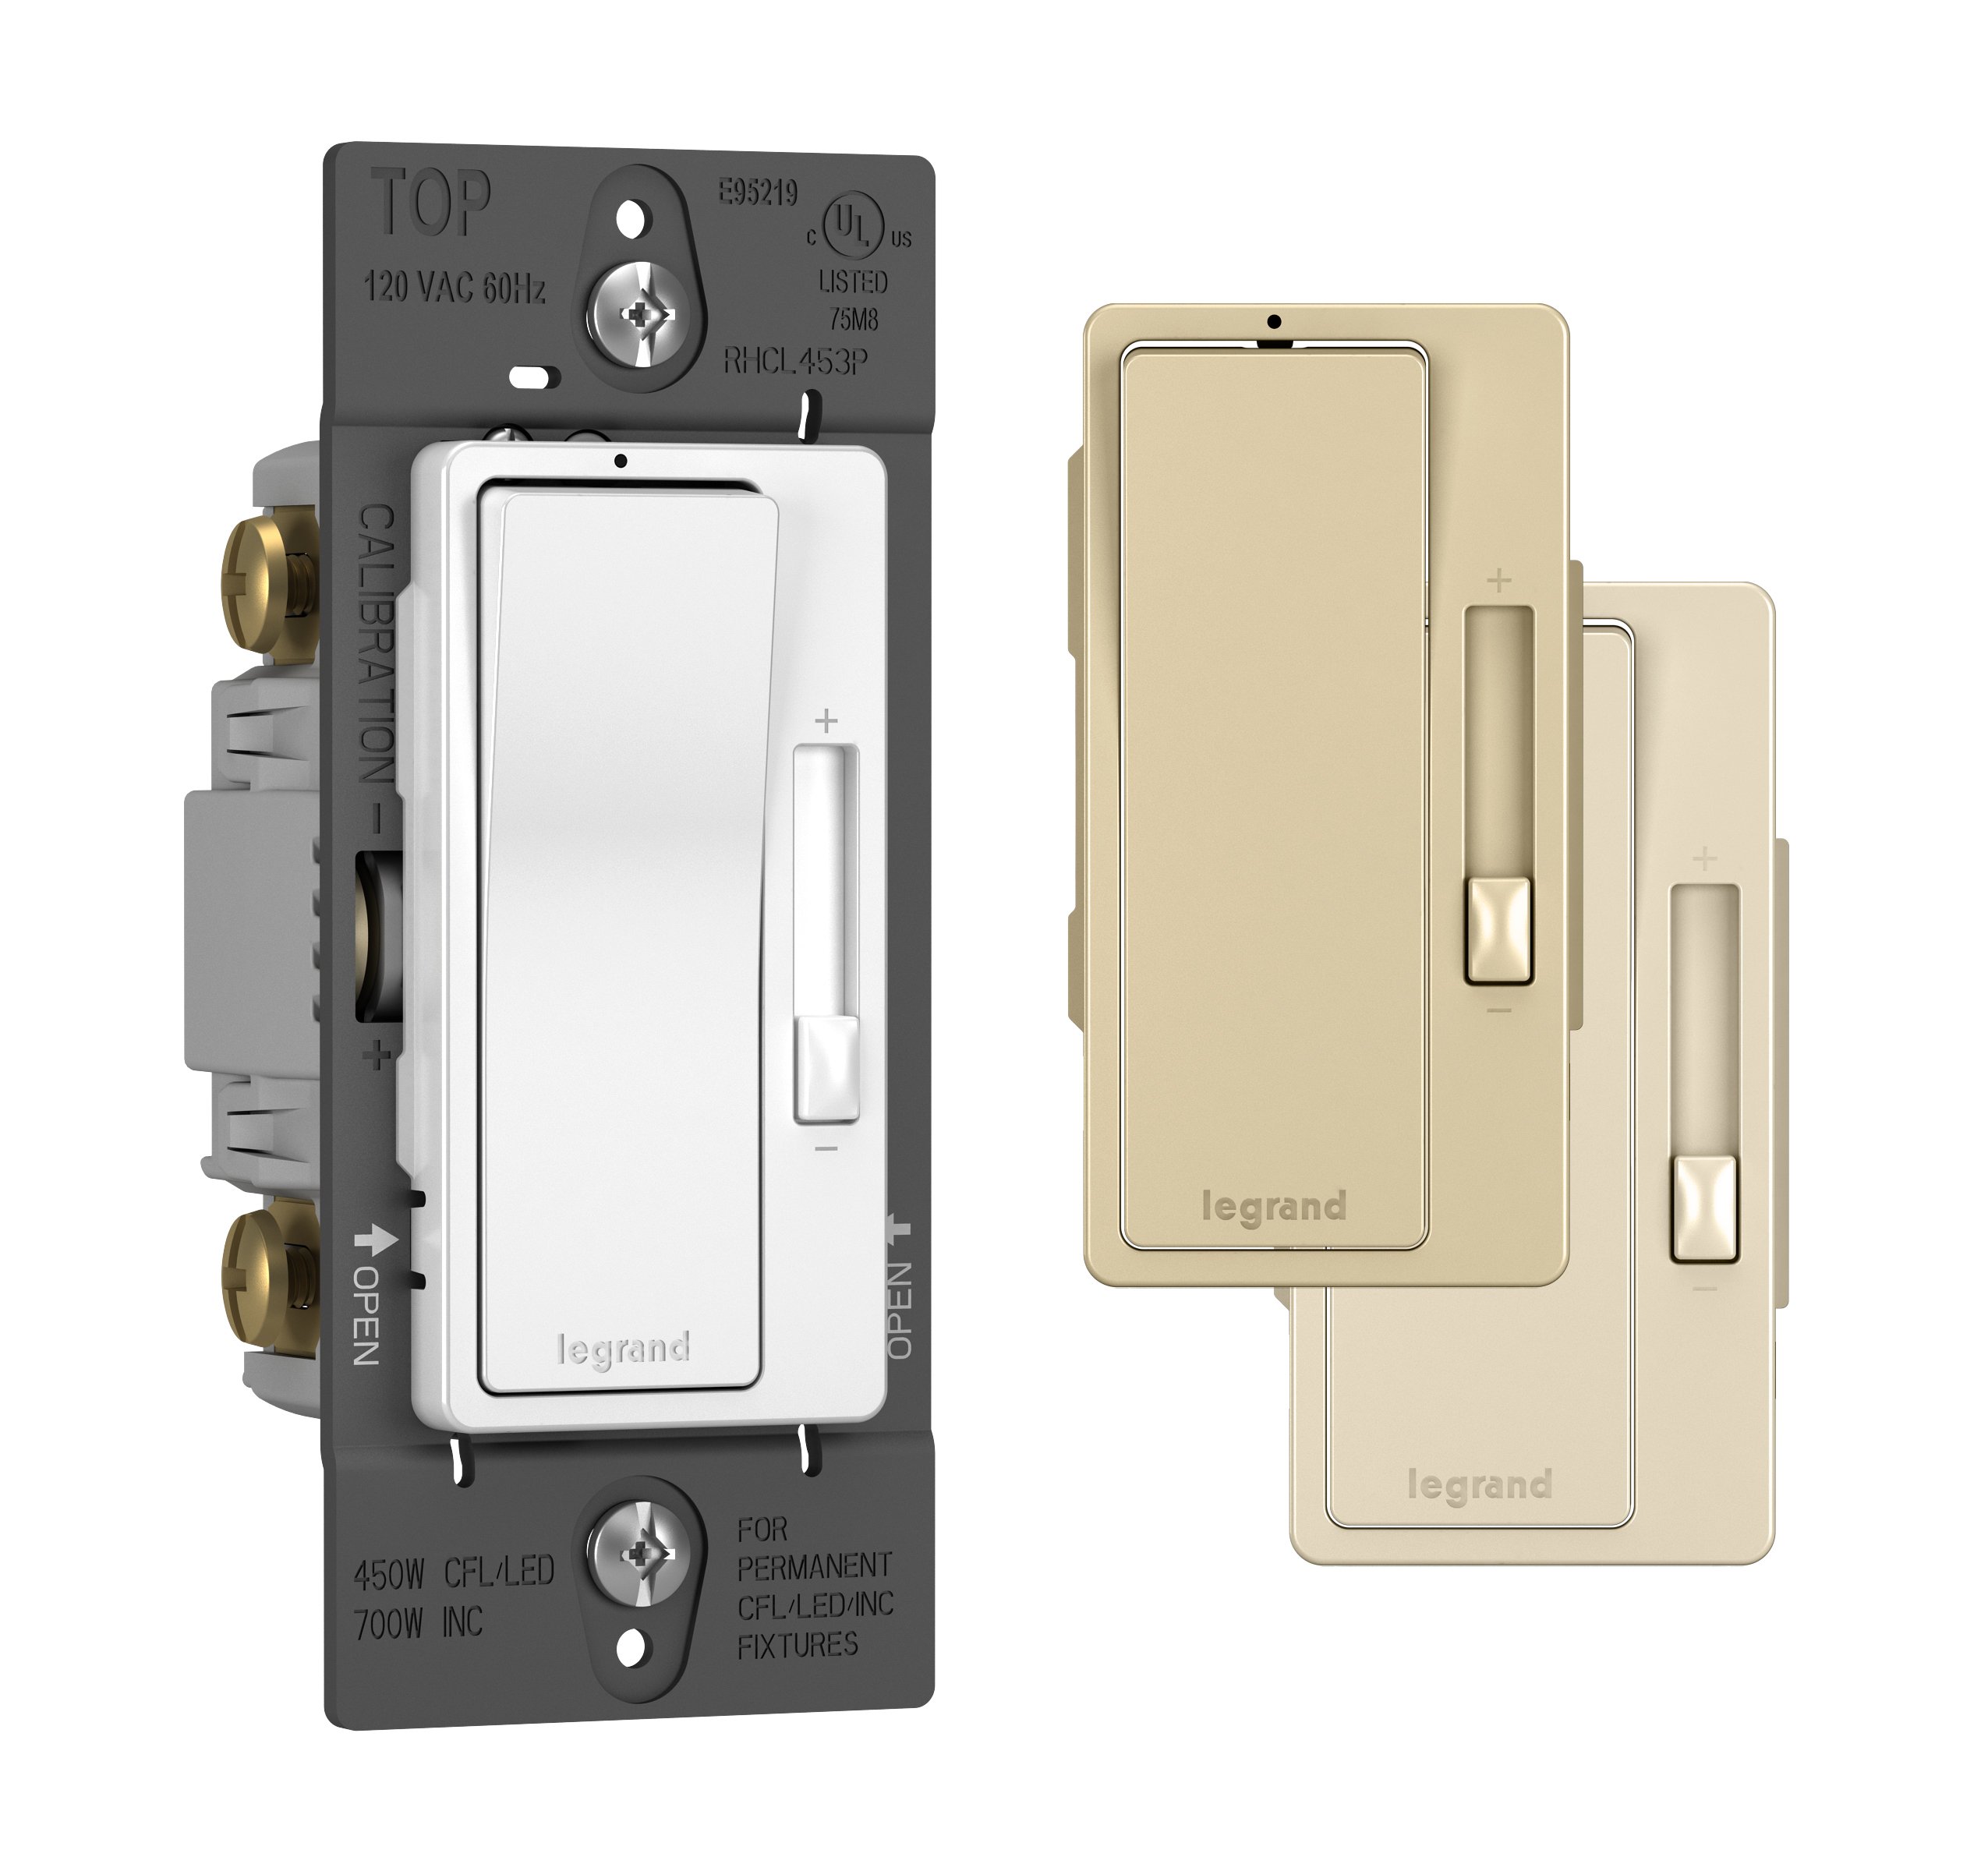 Legrand - Pass & Seymour Radiant Dimmer Light Switch, Single Pole Dimmer Switch and 3 Way Rocker Wall Switch, Interchangeable Tri-Color Faceplates Paddle Dimmer, RHCL453PTCCCV4, 1 Count